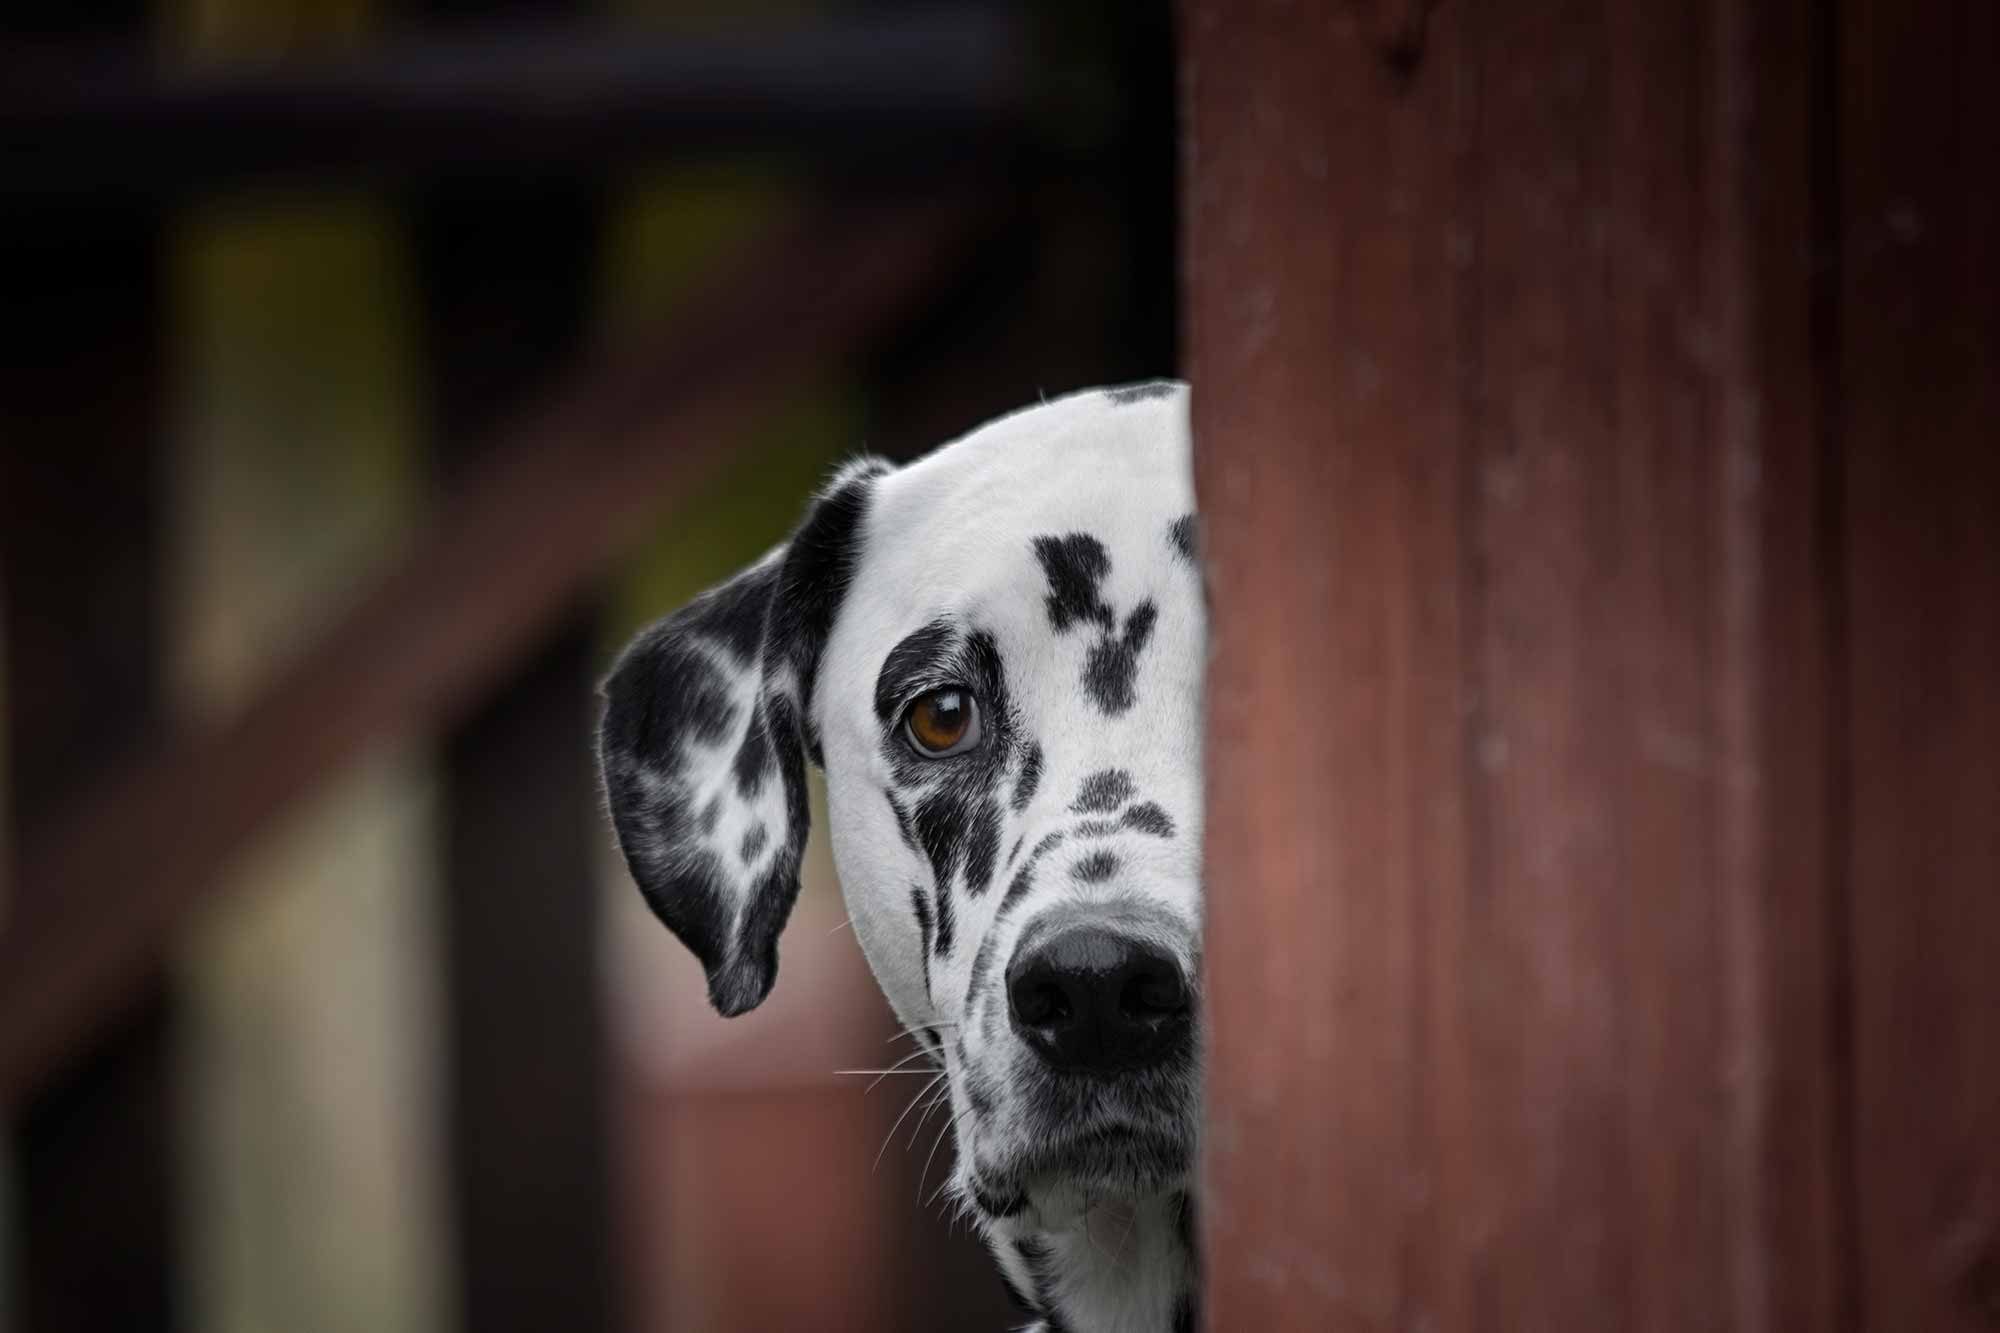 A Dalmatian timidly peeks around a fence post